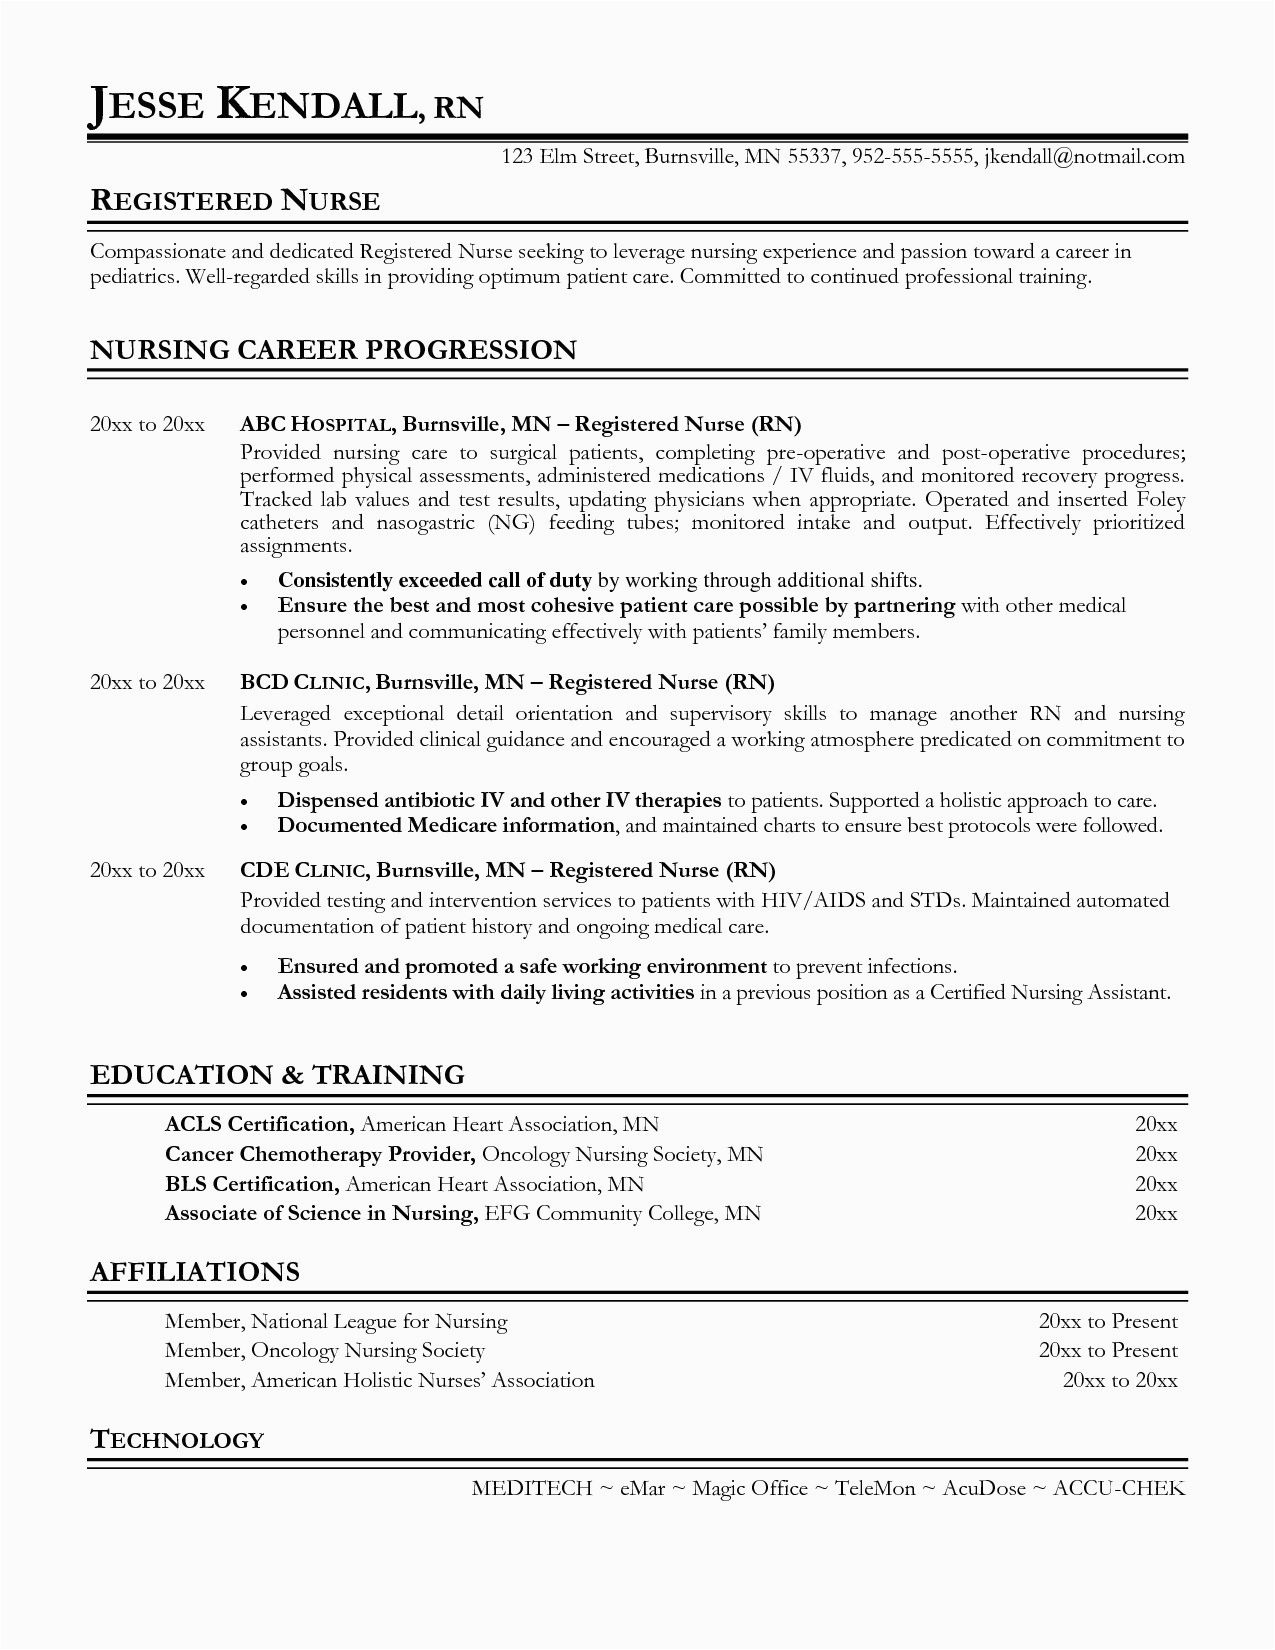 Sample Nursing Resume with Clinical Experience 12 13 Clinical Experience On Resume